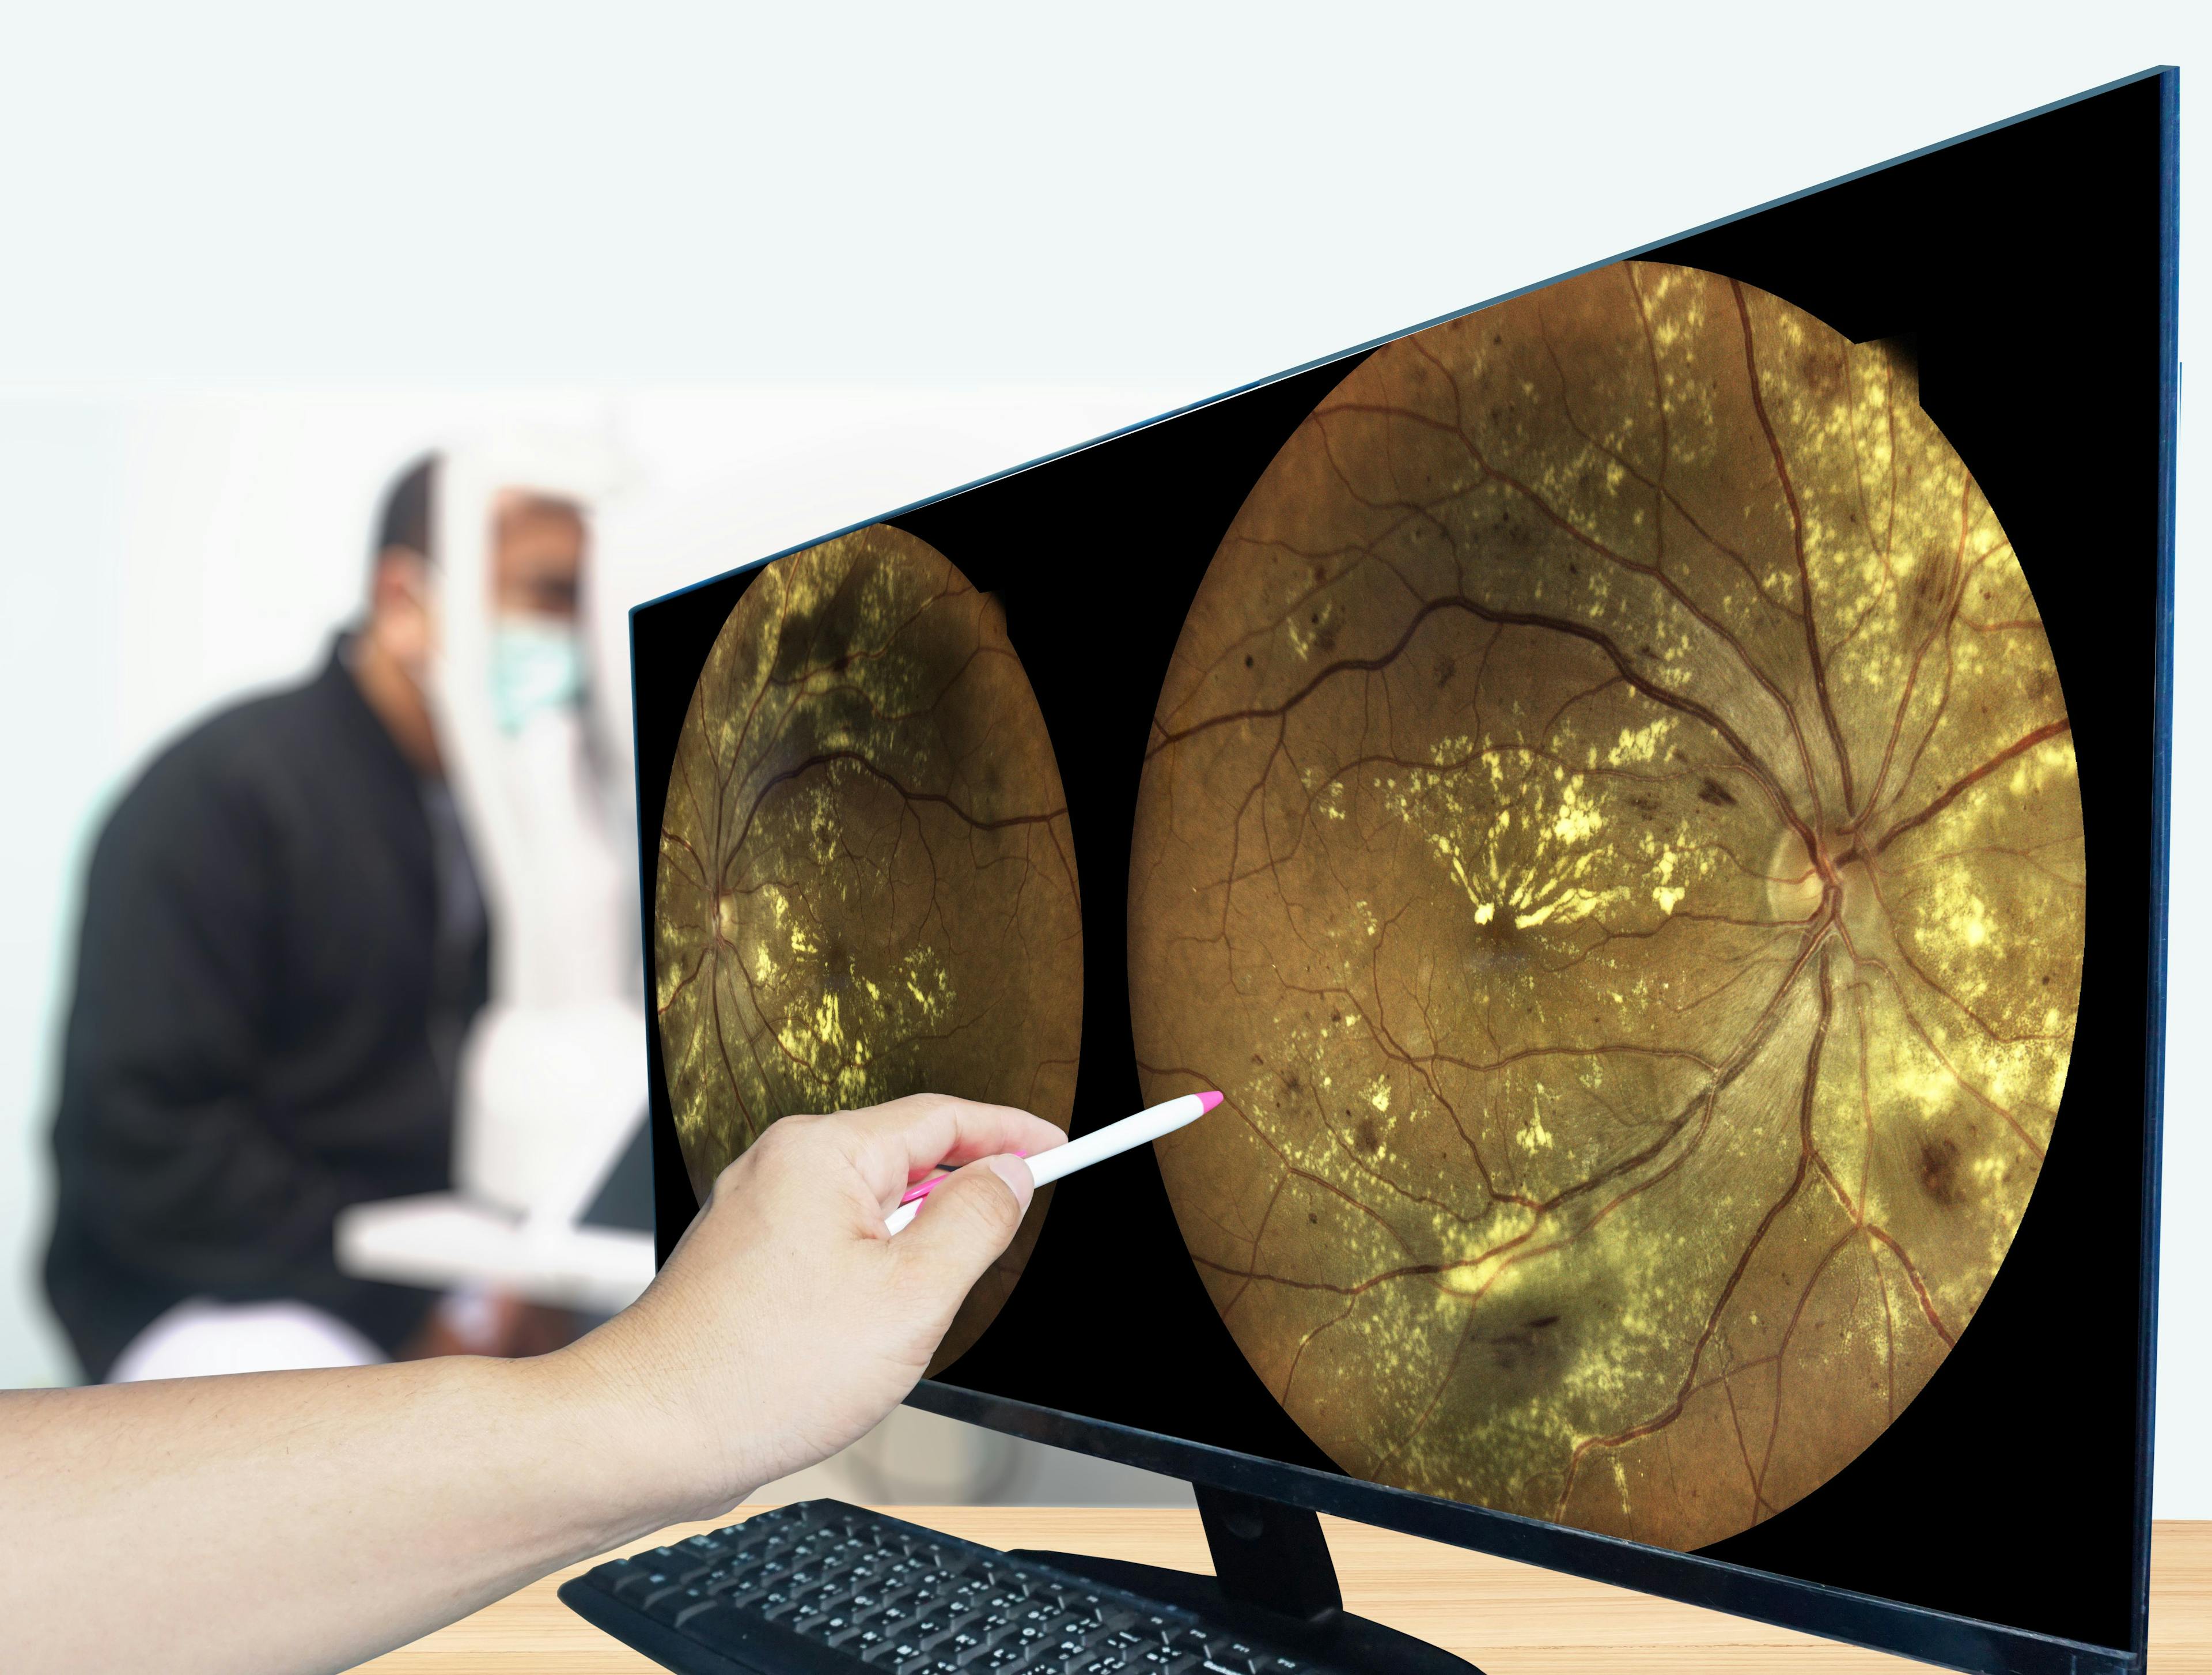 The CLAiR technology is designed to integrate readily with existing retinal imaging cameras, to provide real-time CVD risk assessments with accuracy comparable to traditional cardiovascular risk assessment tools. (Image courtesy of Adobe Stock)